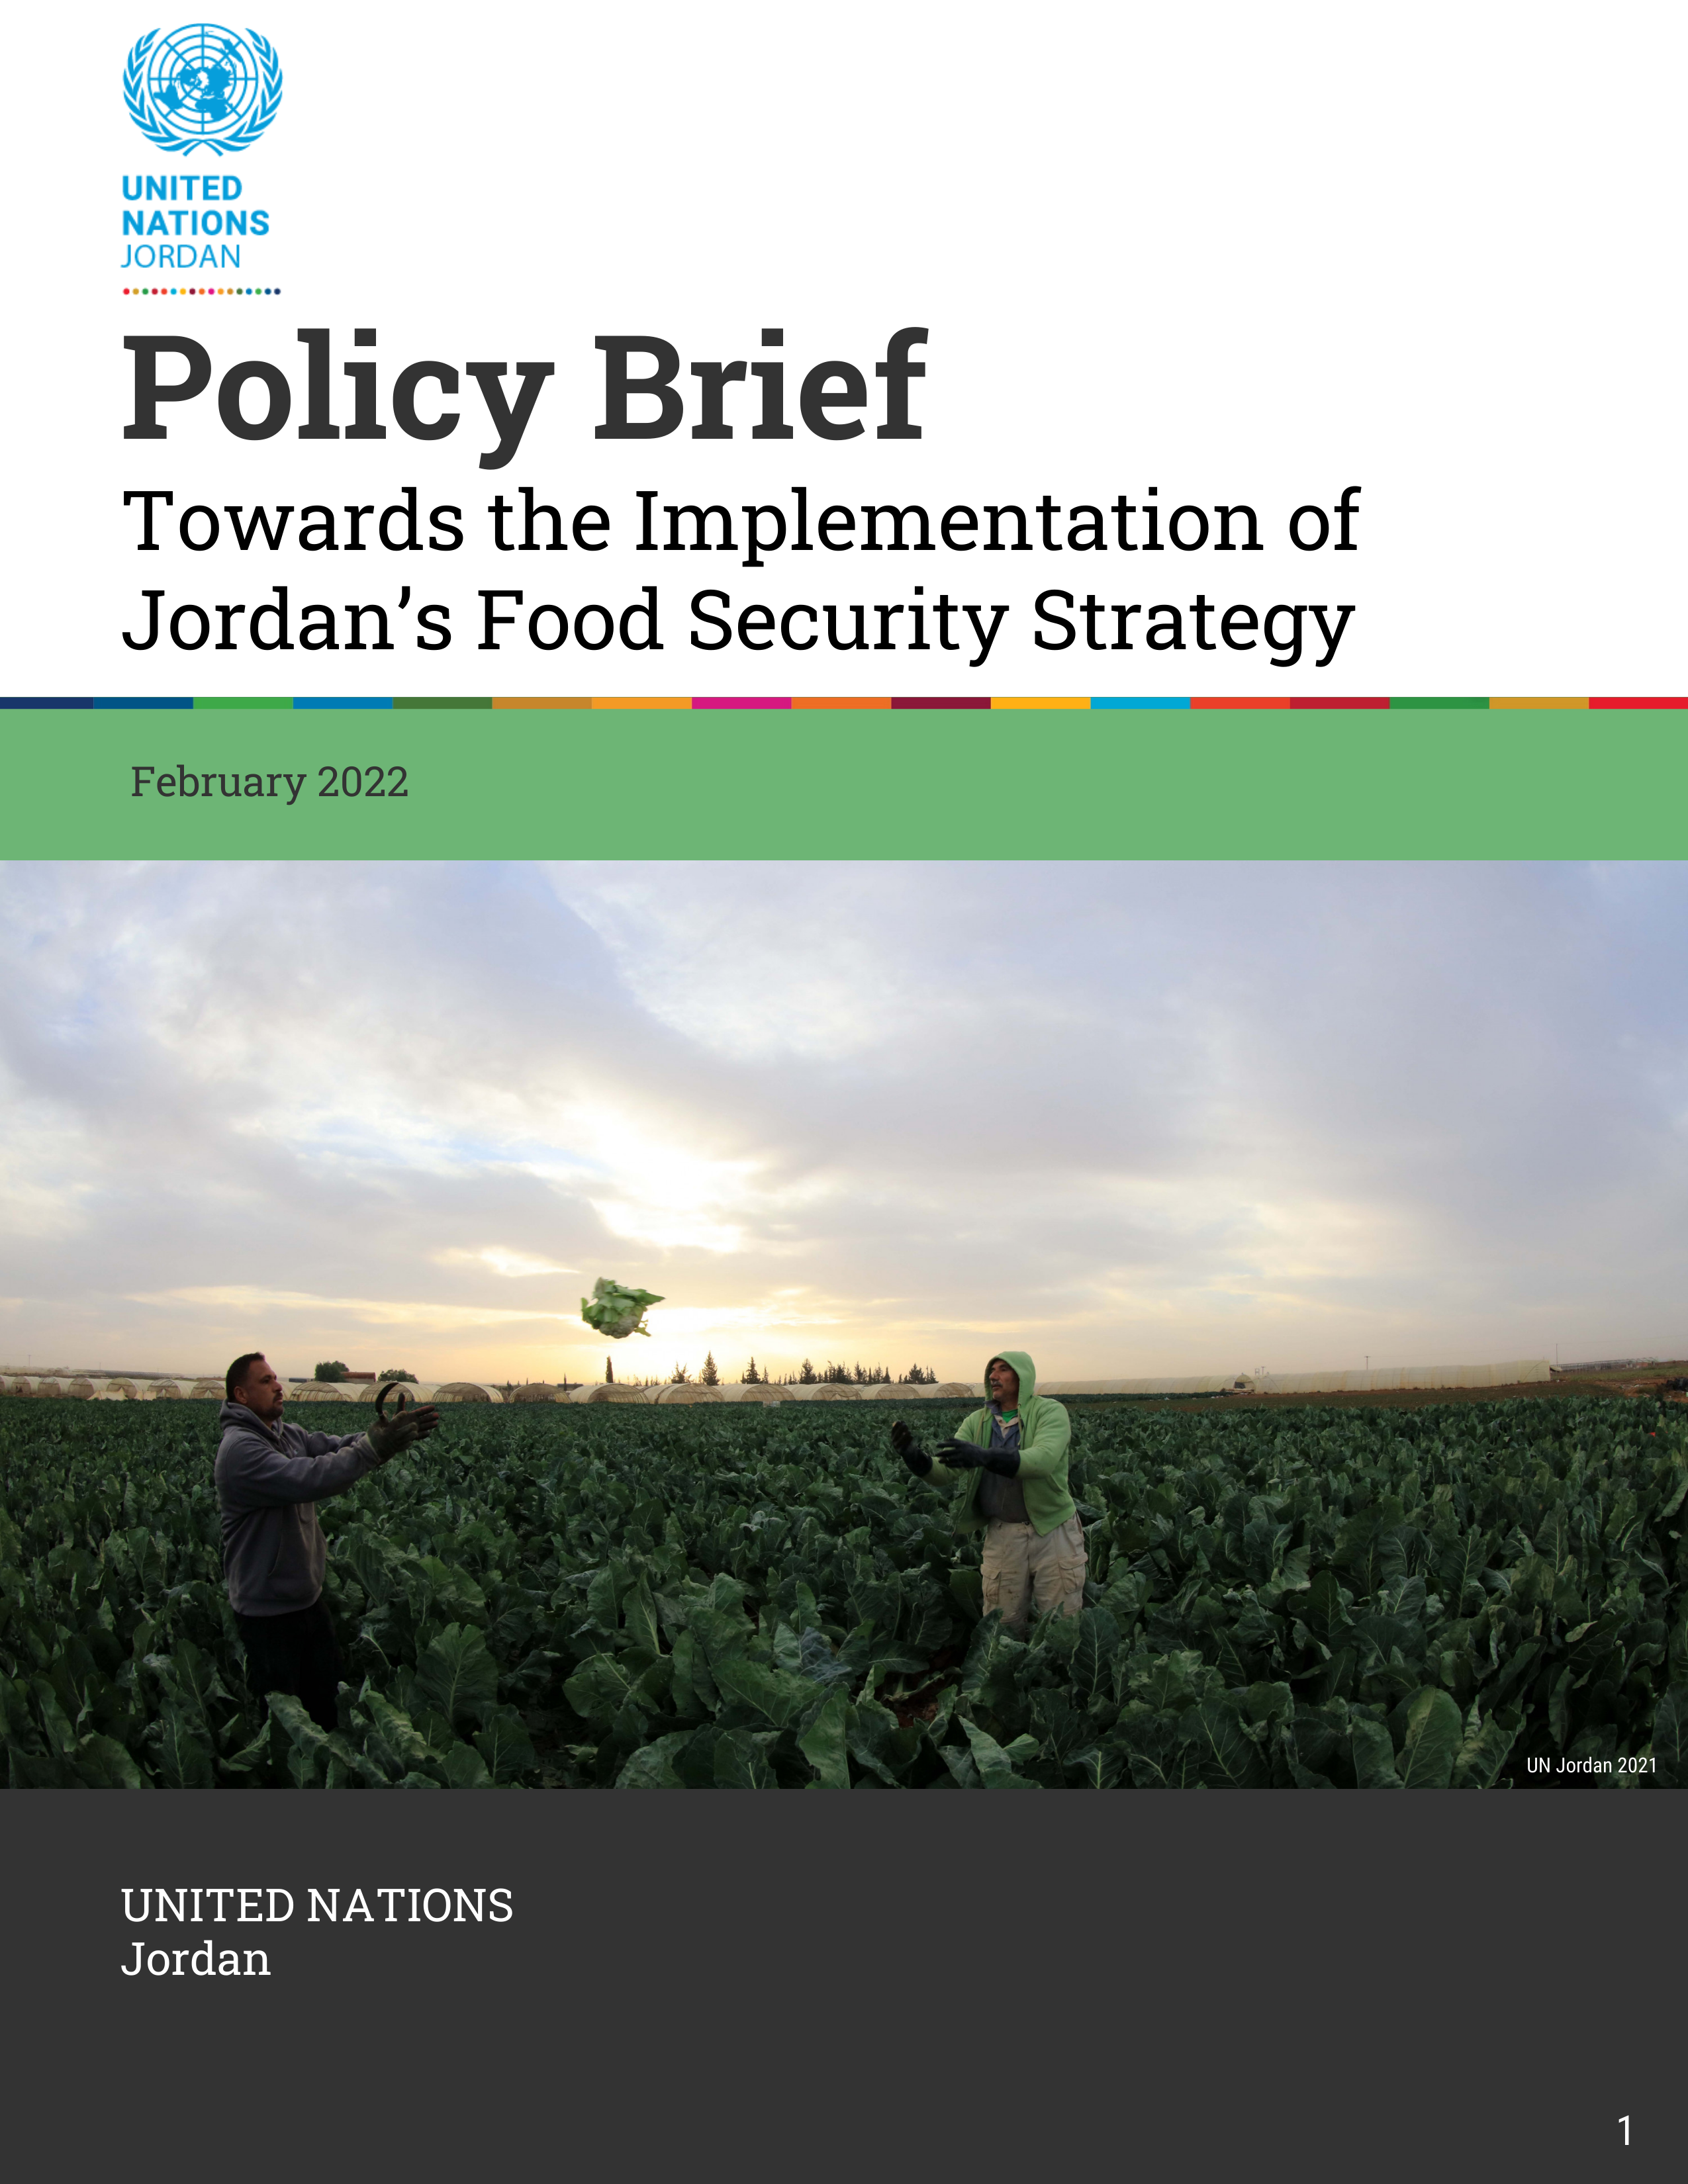 Policy Brief: Towards the Implementation of Jordan’s Food Security Strategy